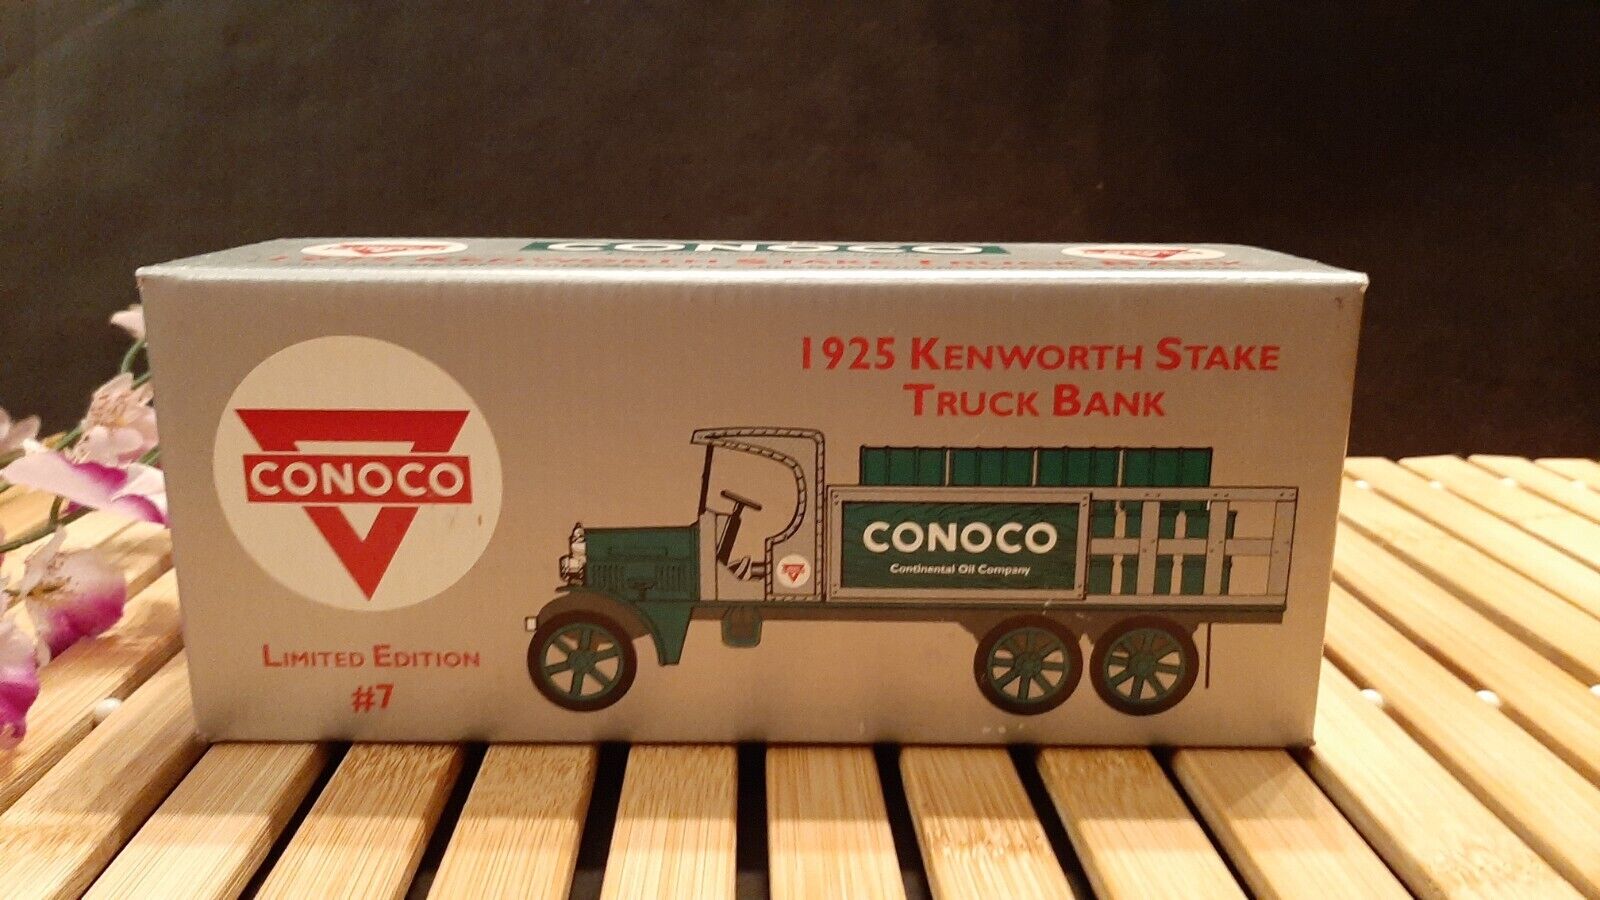 CONOCO 1925 KENTWORTH STAKE TRUCK BANK Limited Edition #7 1993 NEW